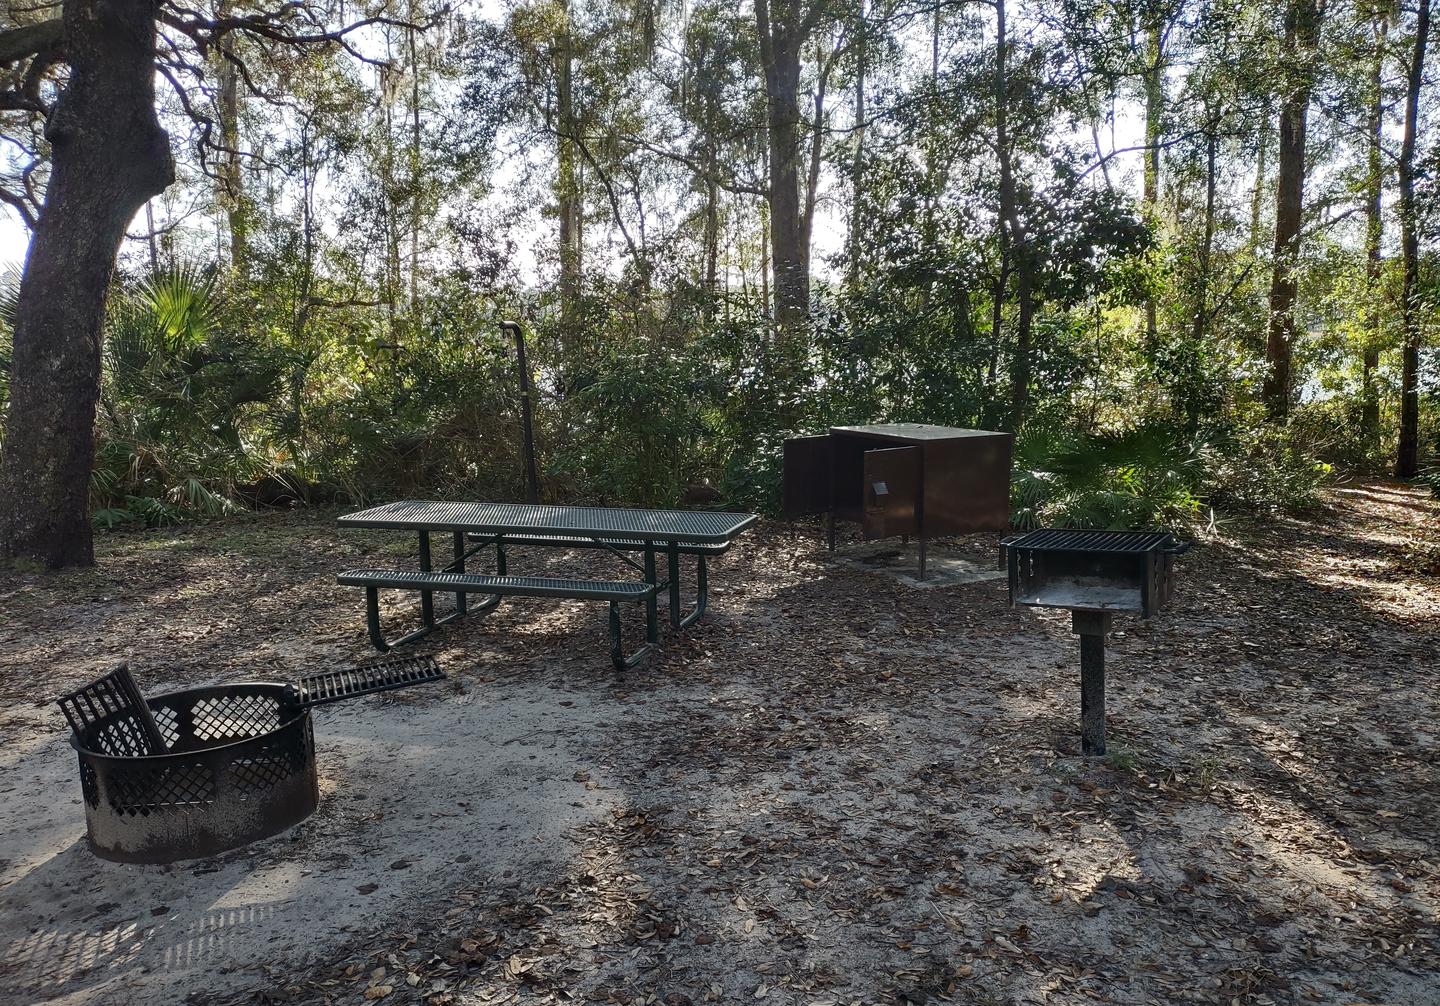 Another view of site 18Amenities: picnic table, grill, fire ring, light pole, bear-proof storage locker